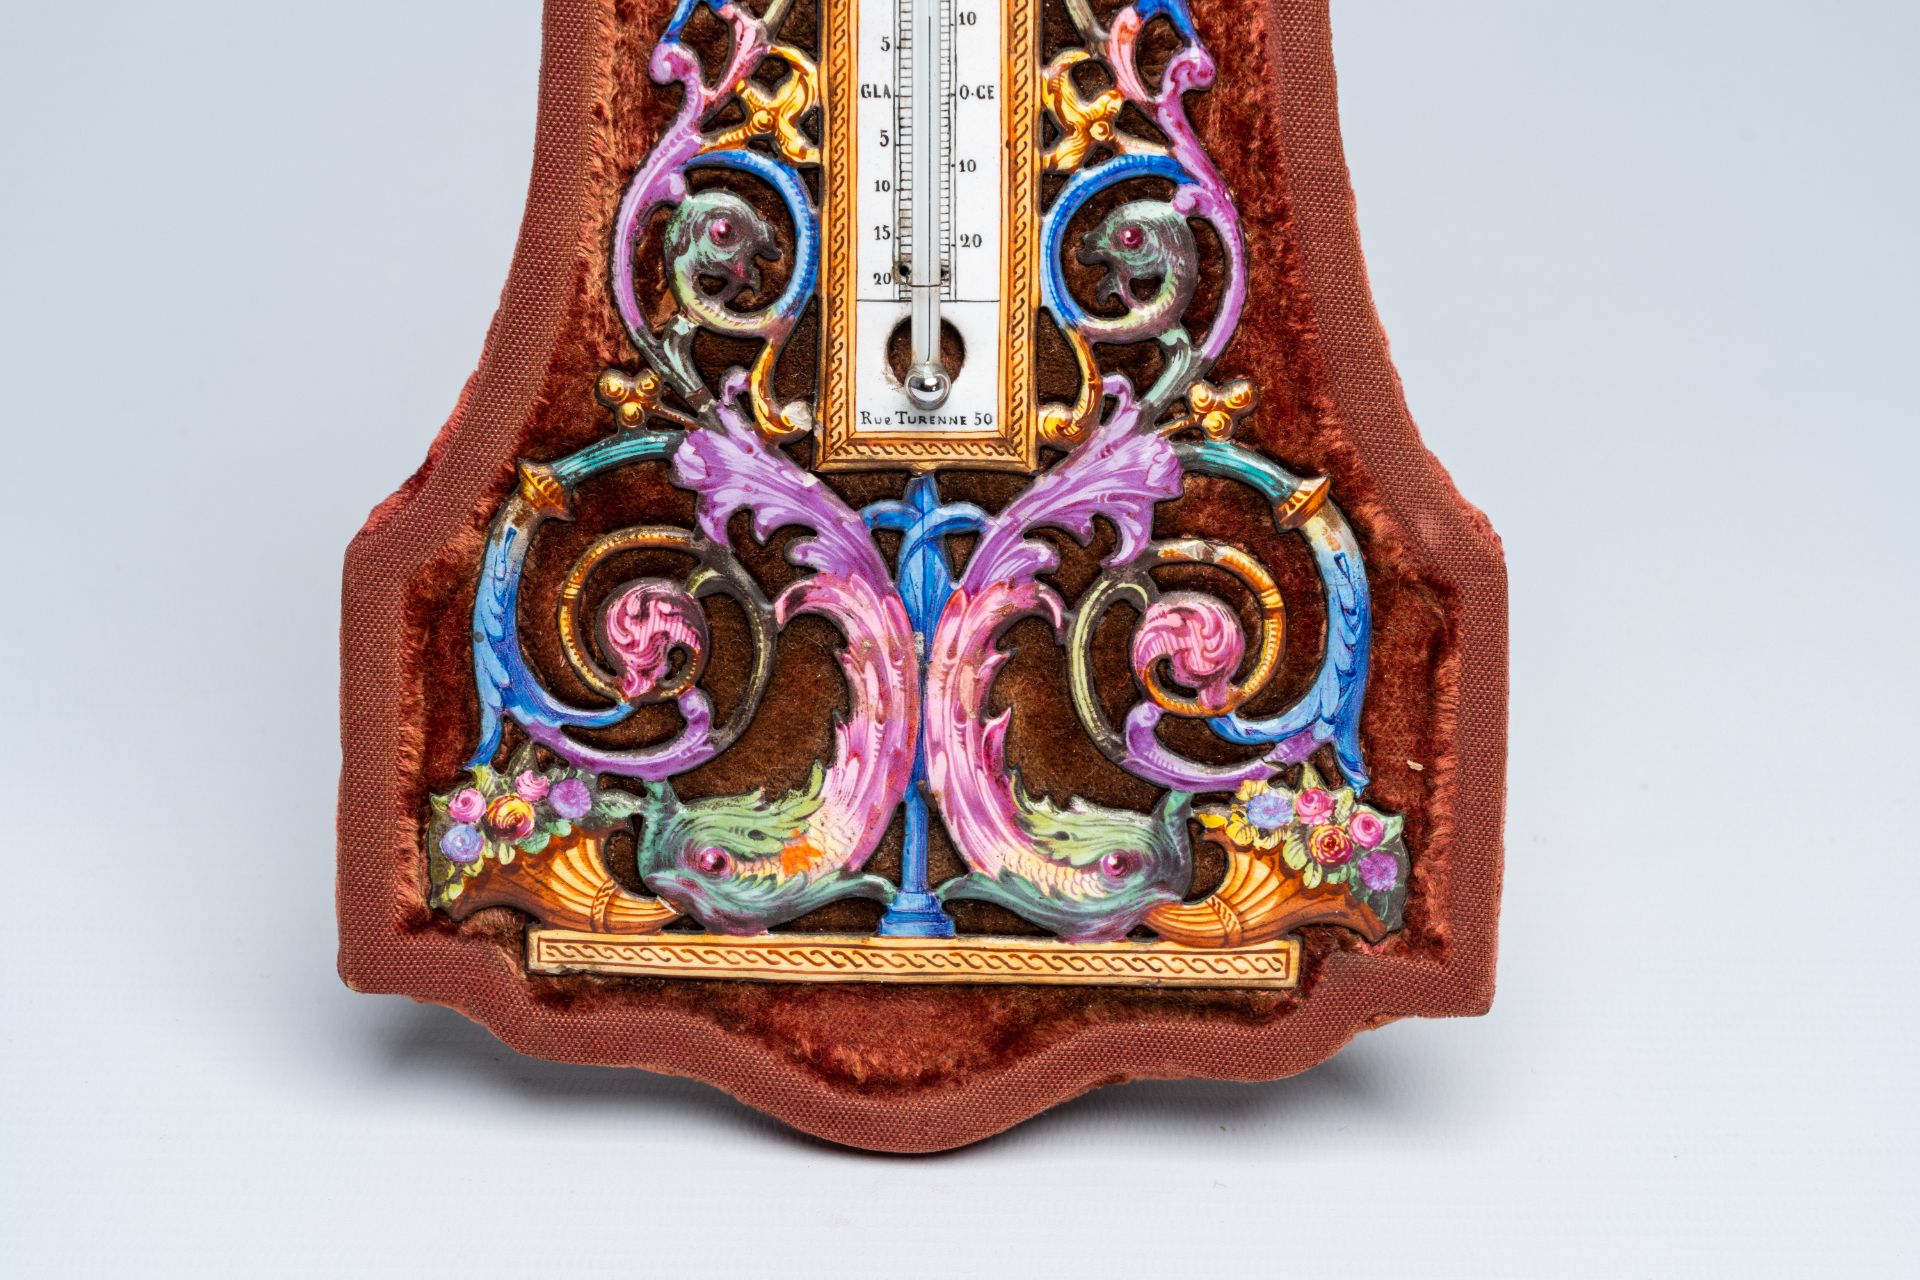 A fine French enamel thermometer with floral design, signed A. Pottier, Paris, 19th/20th C. - Image 3 of 4